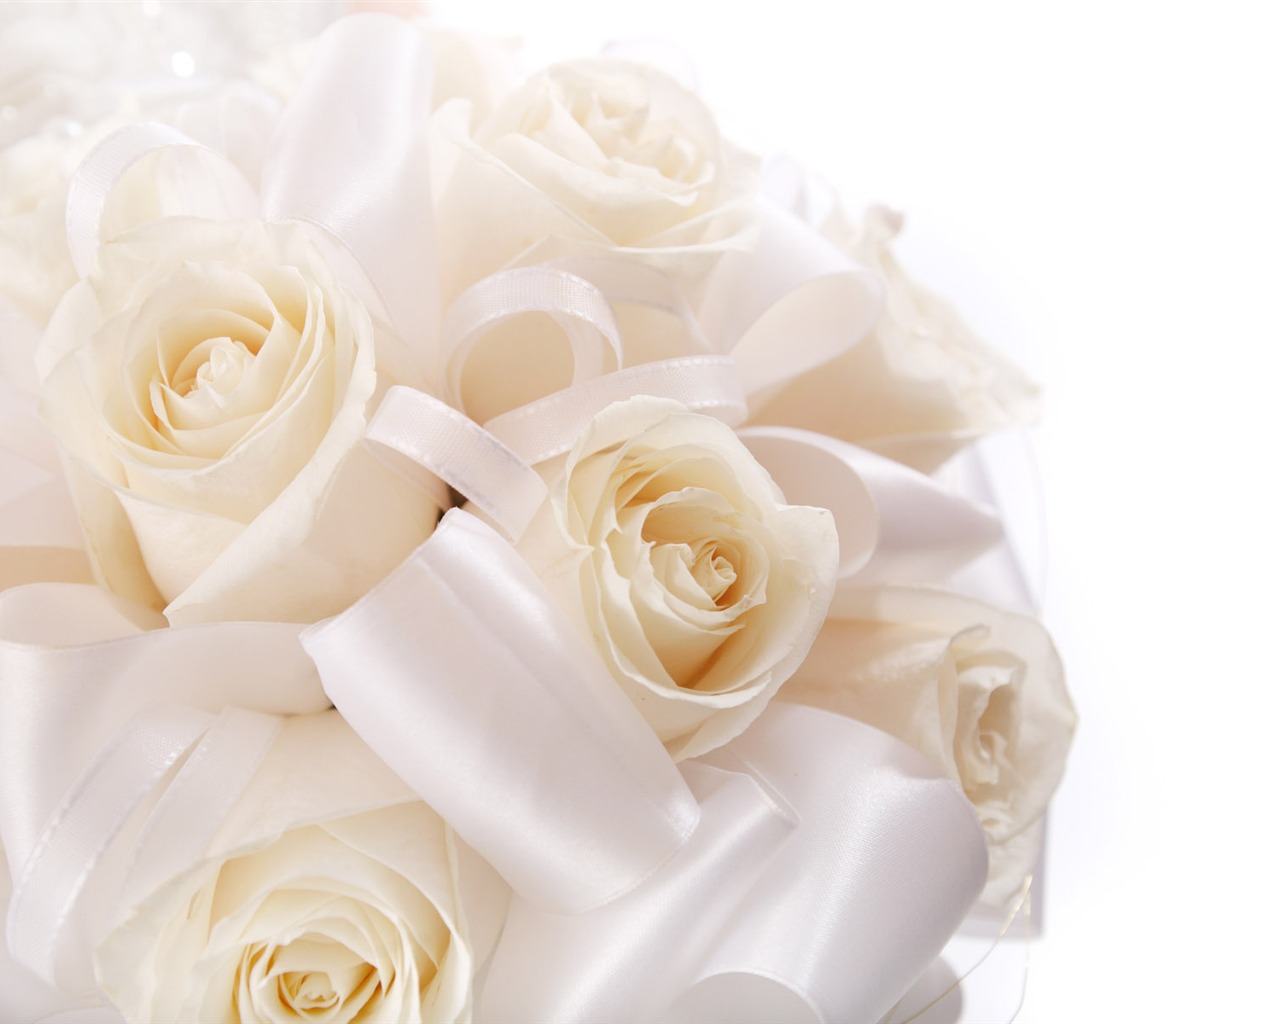 Weddings and Flowers wallpaper (1) #4 - 1280x1024